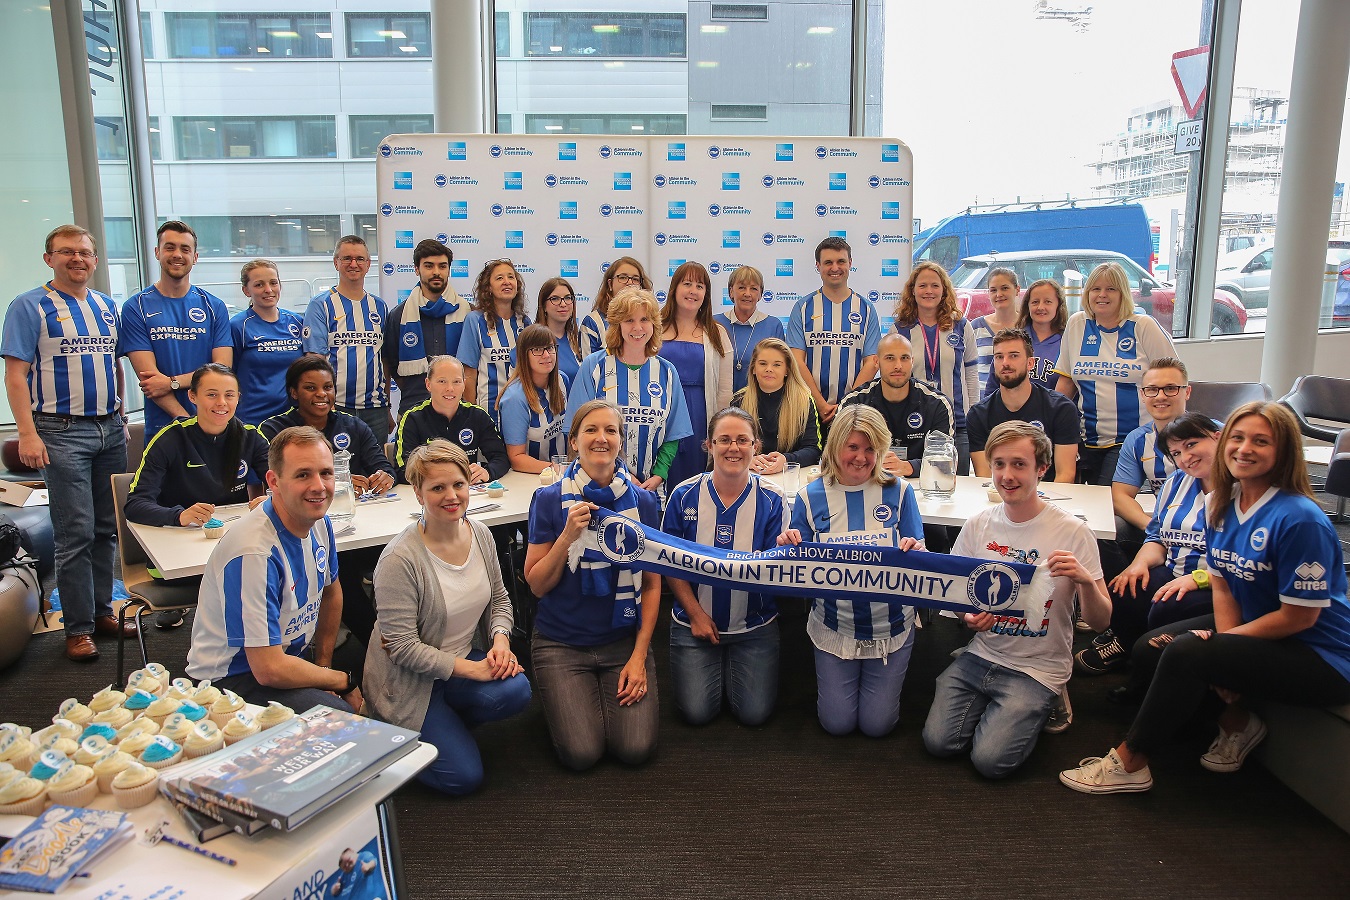 Blue and White Day raises money for Albion in the Community